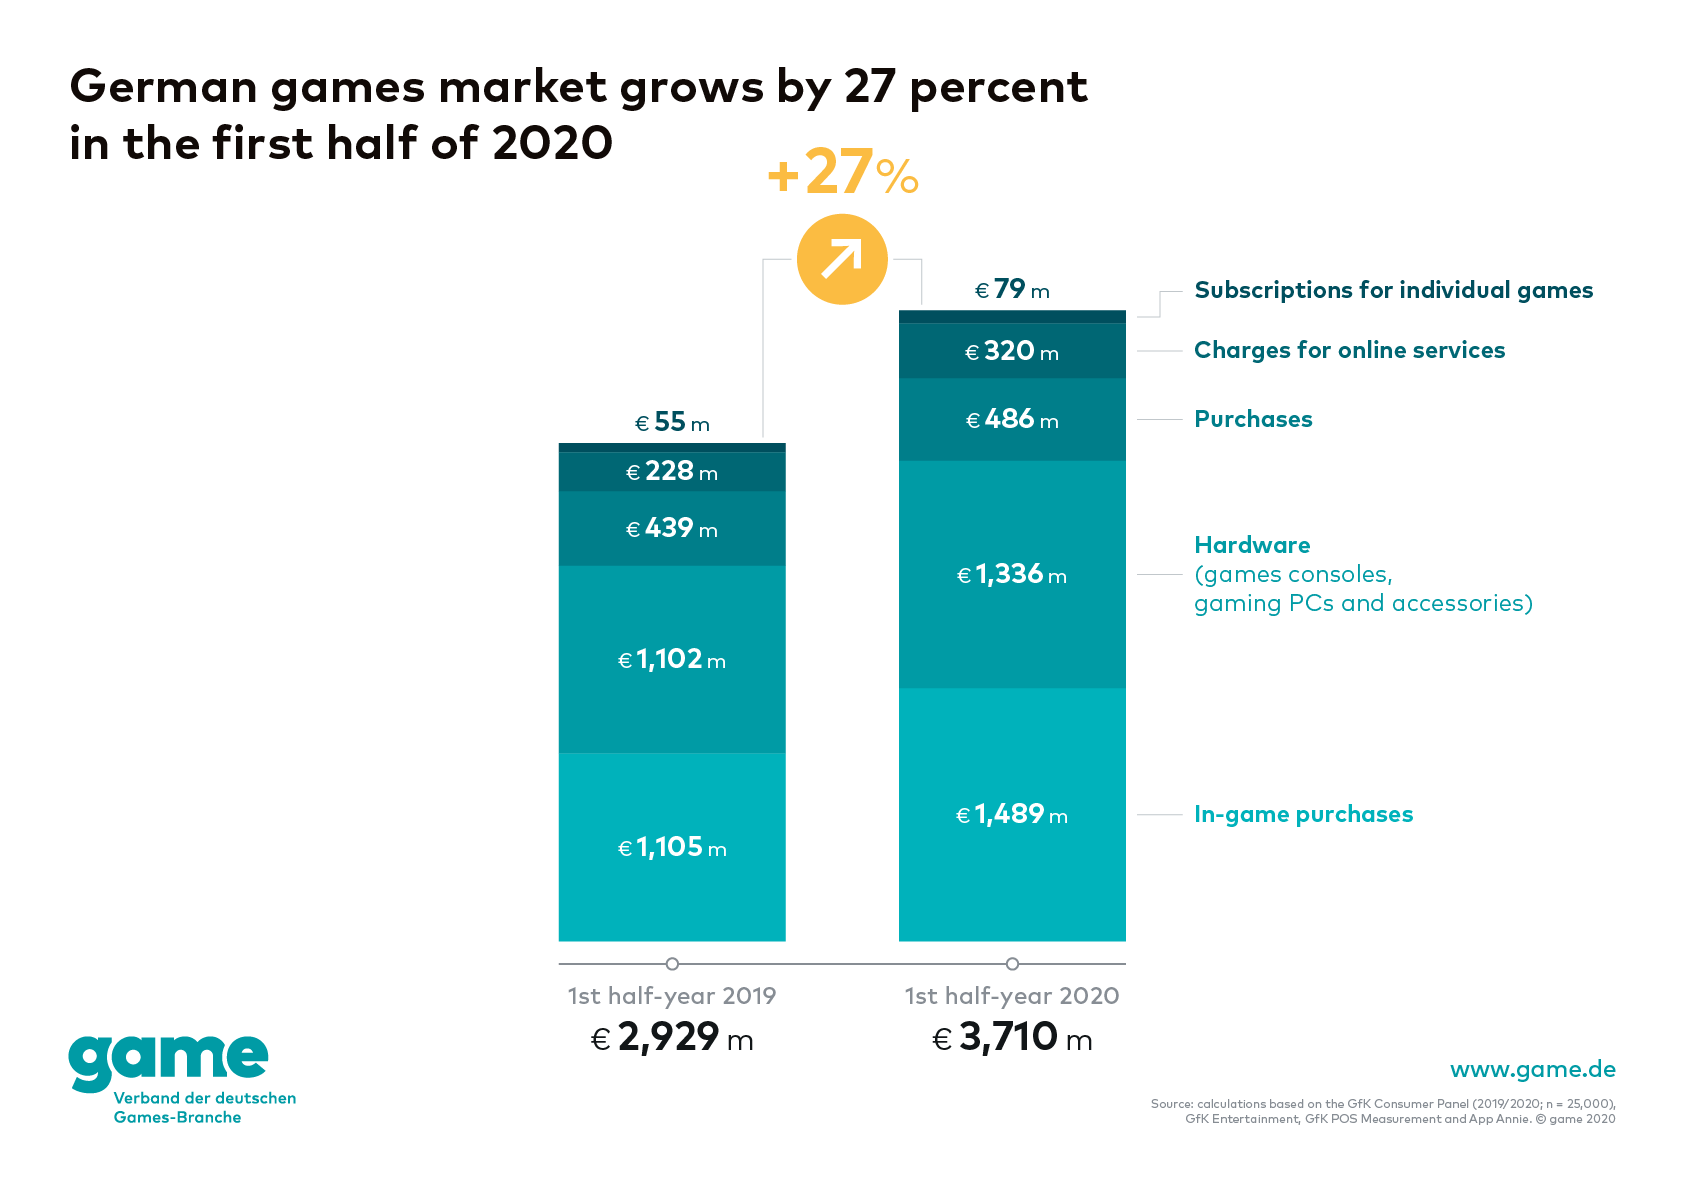 German games market grows by 27 per cent in the first six months of 2020